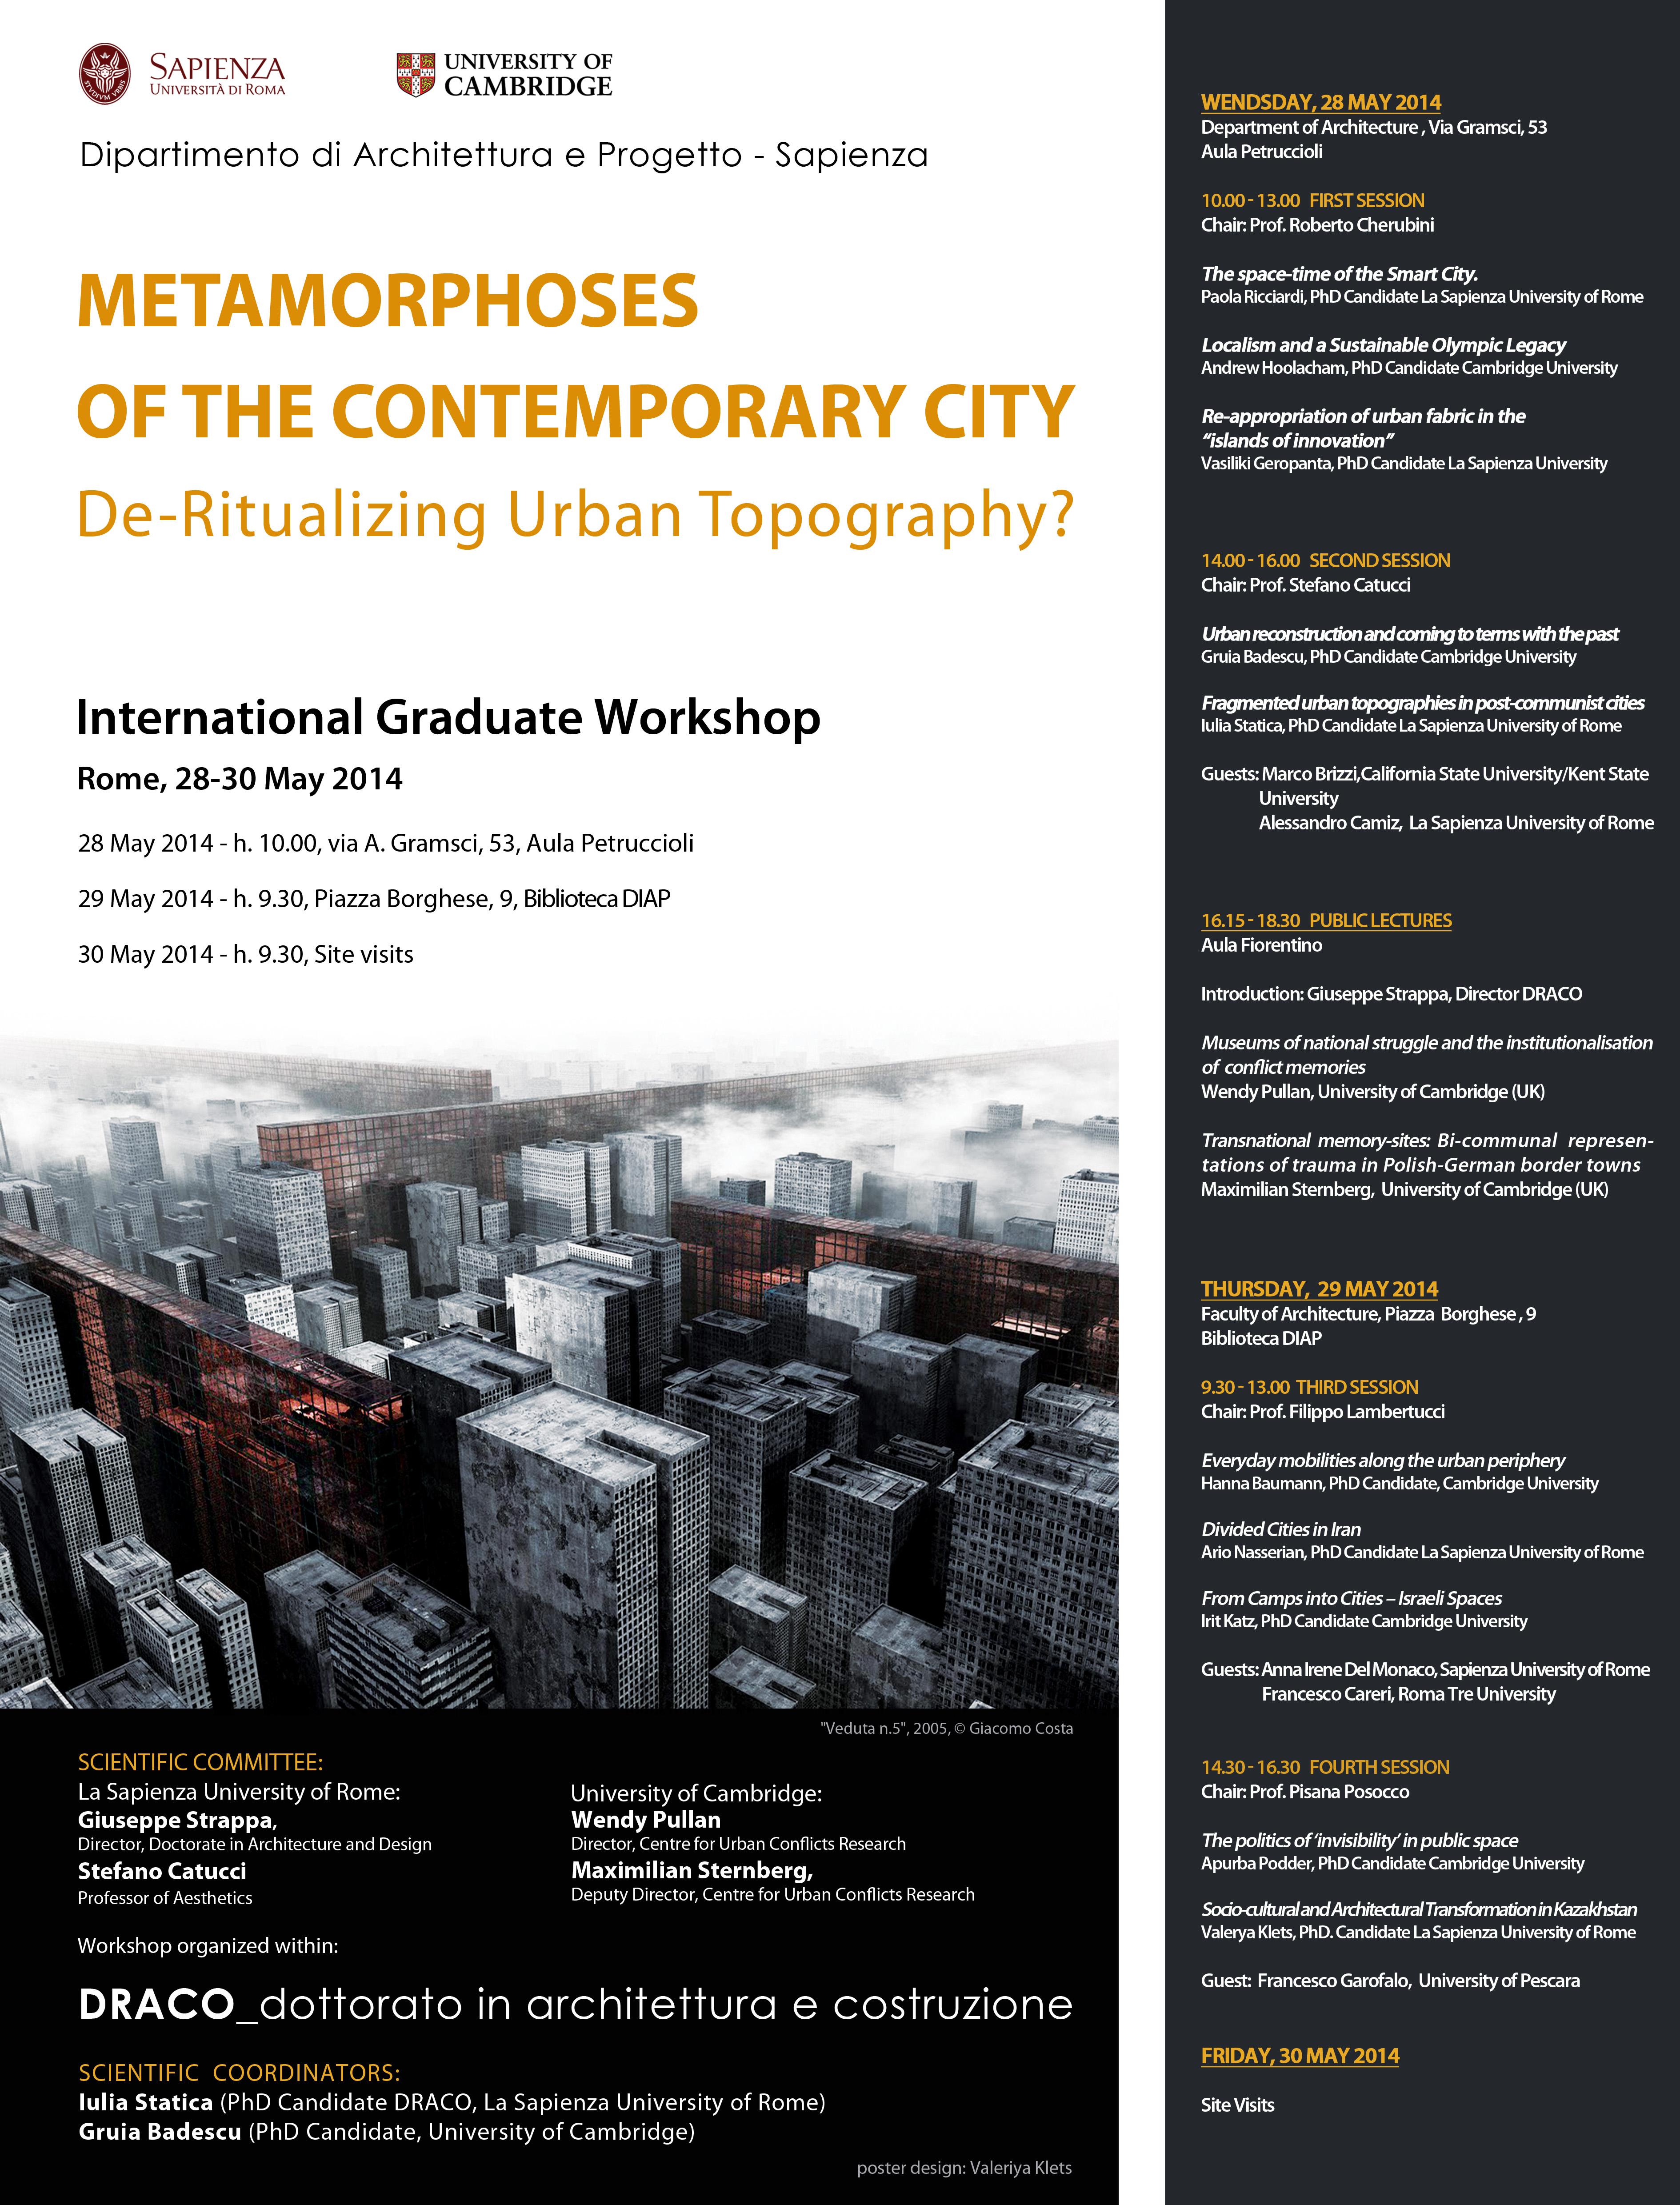 Metamorphoses of the Contemporary City: De-Ritualizing Urban Topography: Wendy Pullan and Max Sternberg to attend an exchange workshop with five PhD students at La Sapienza University in Rome